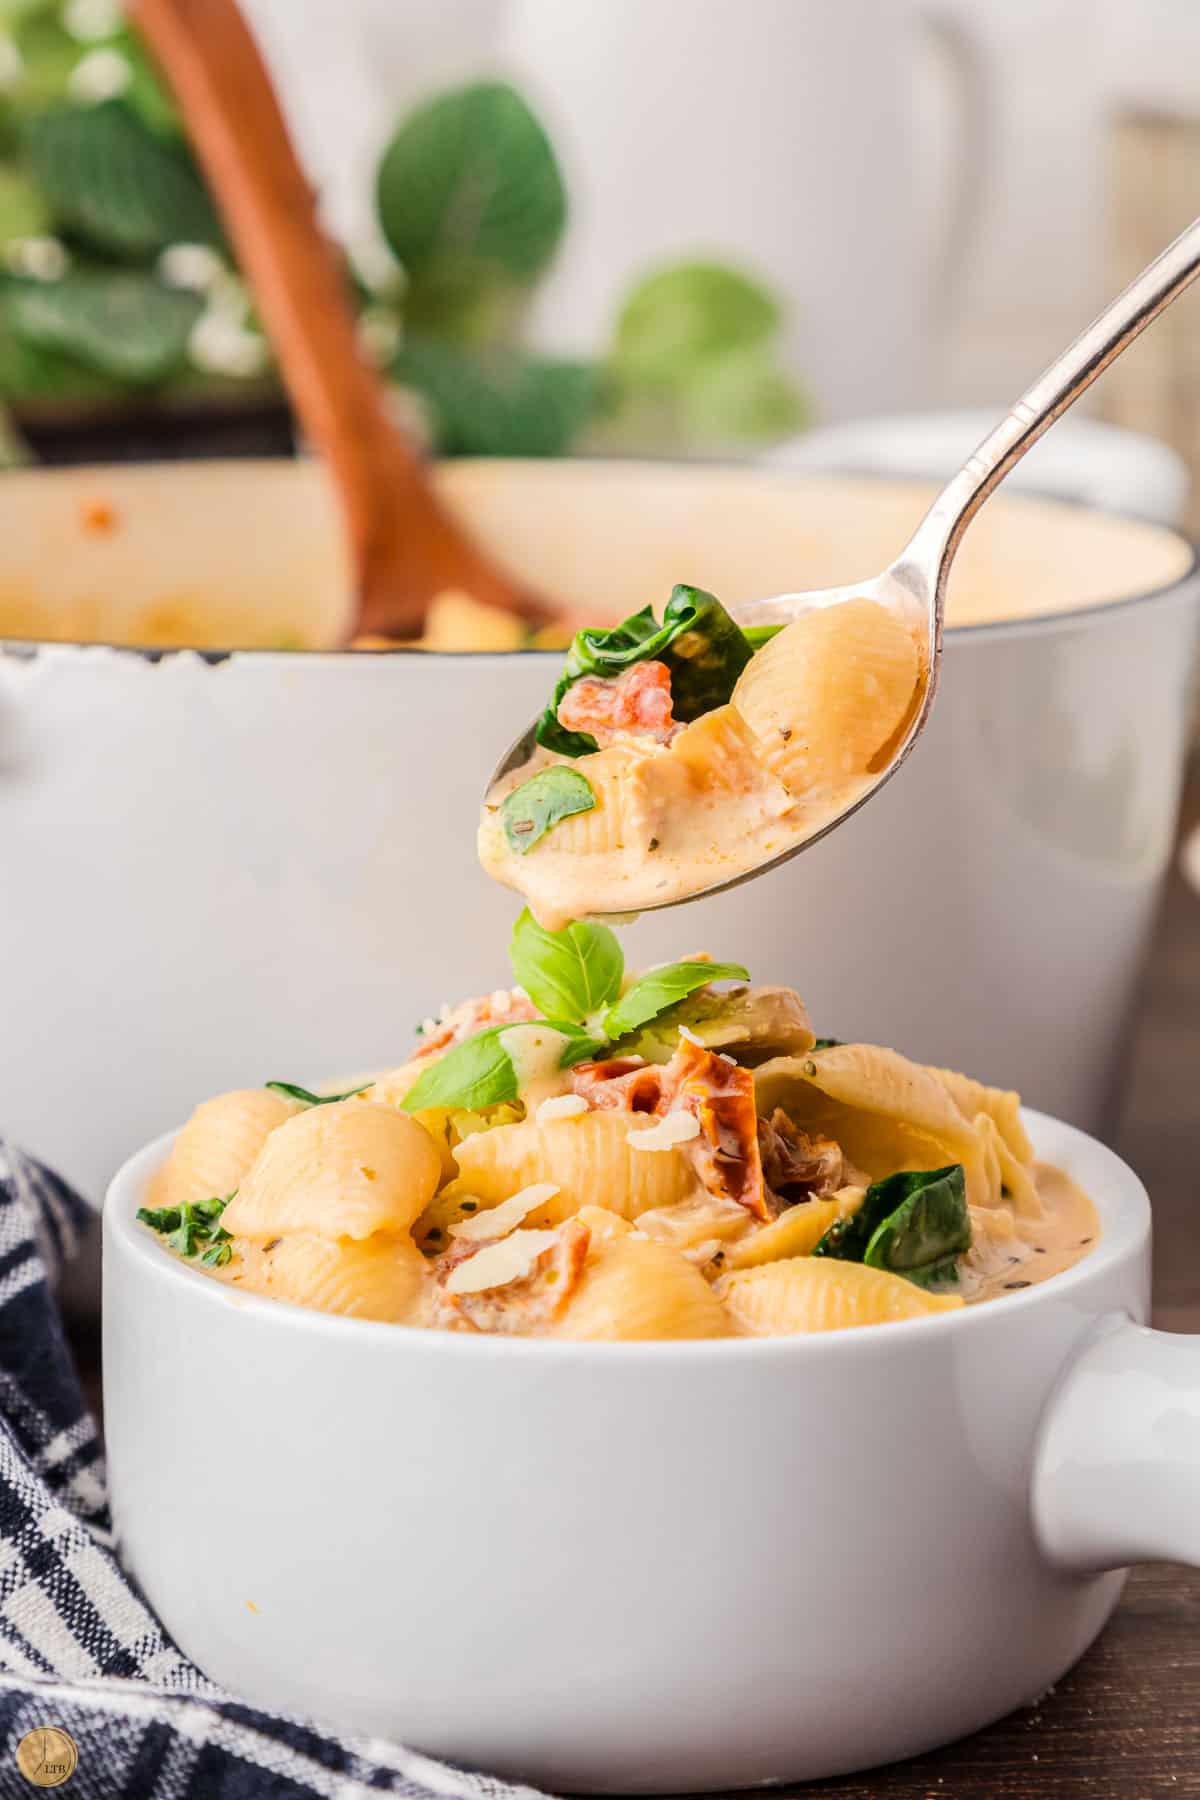 irresistible soup with the familiar flavors of sun-dried tomato and spinach